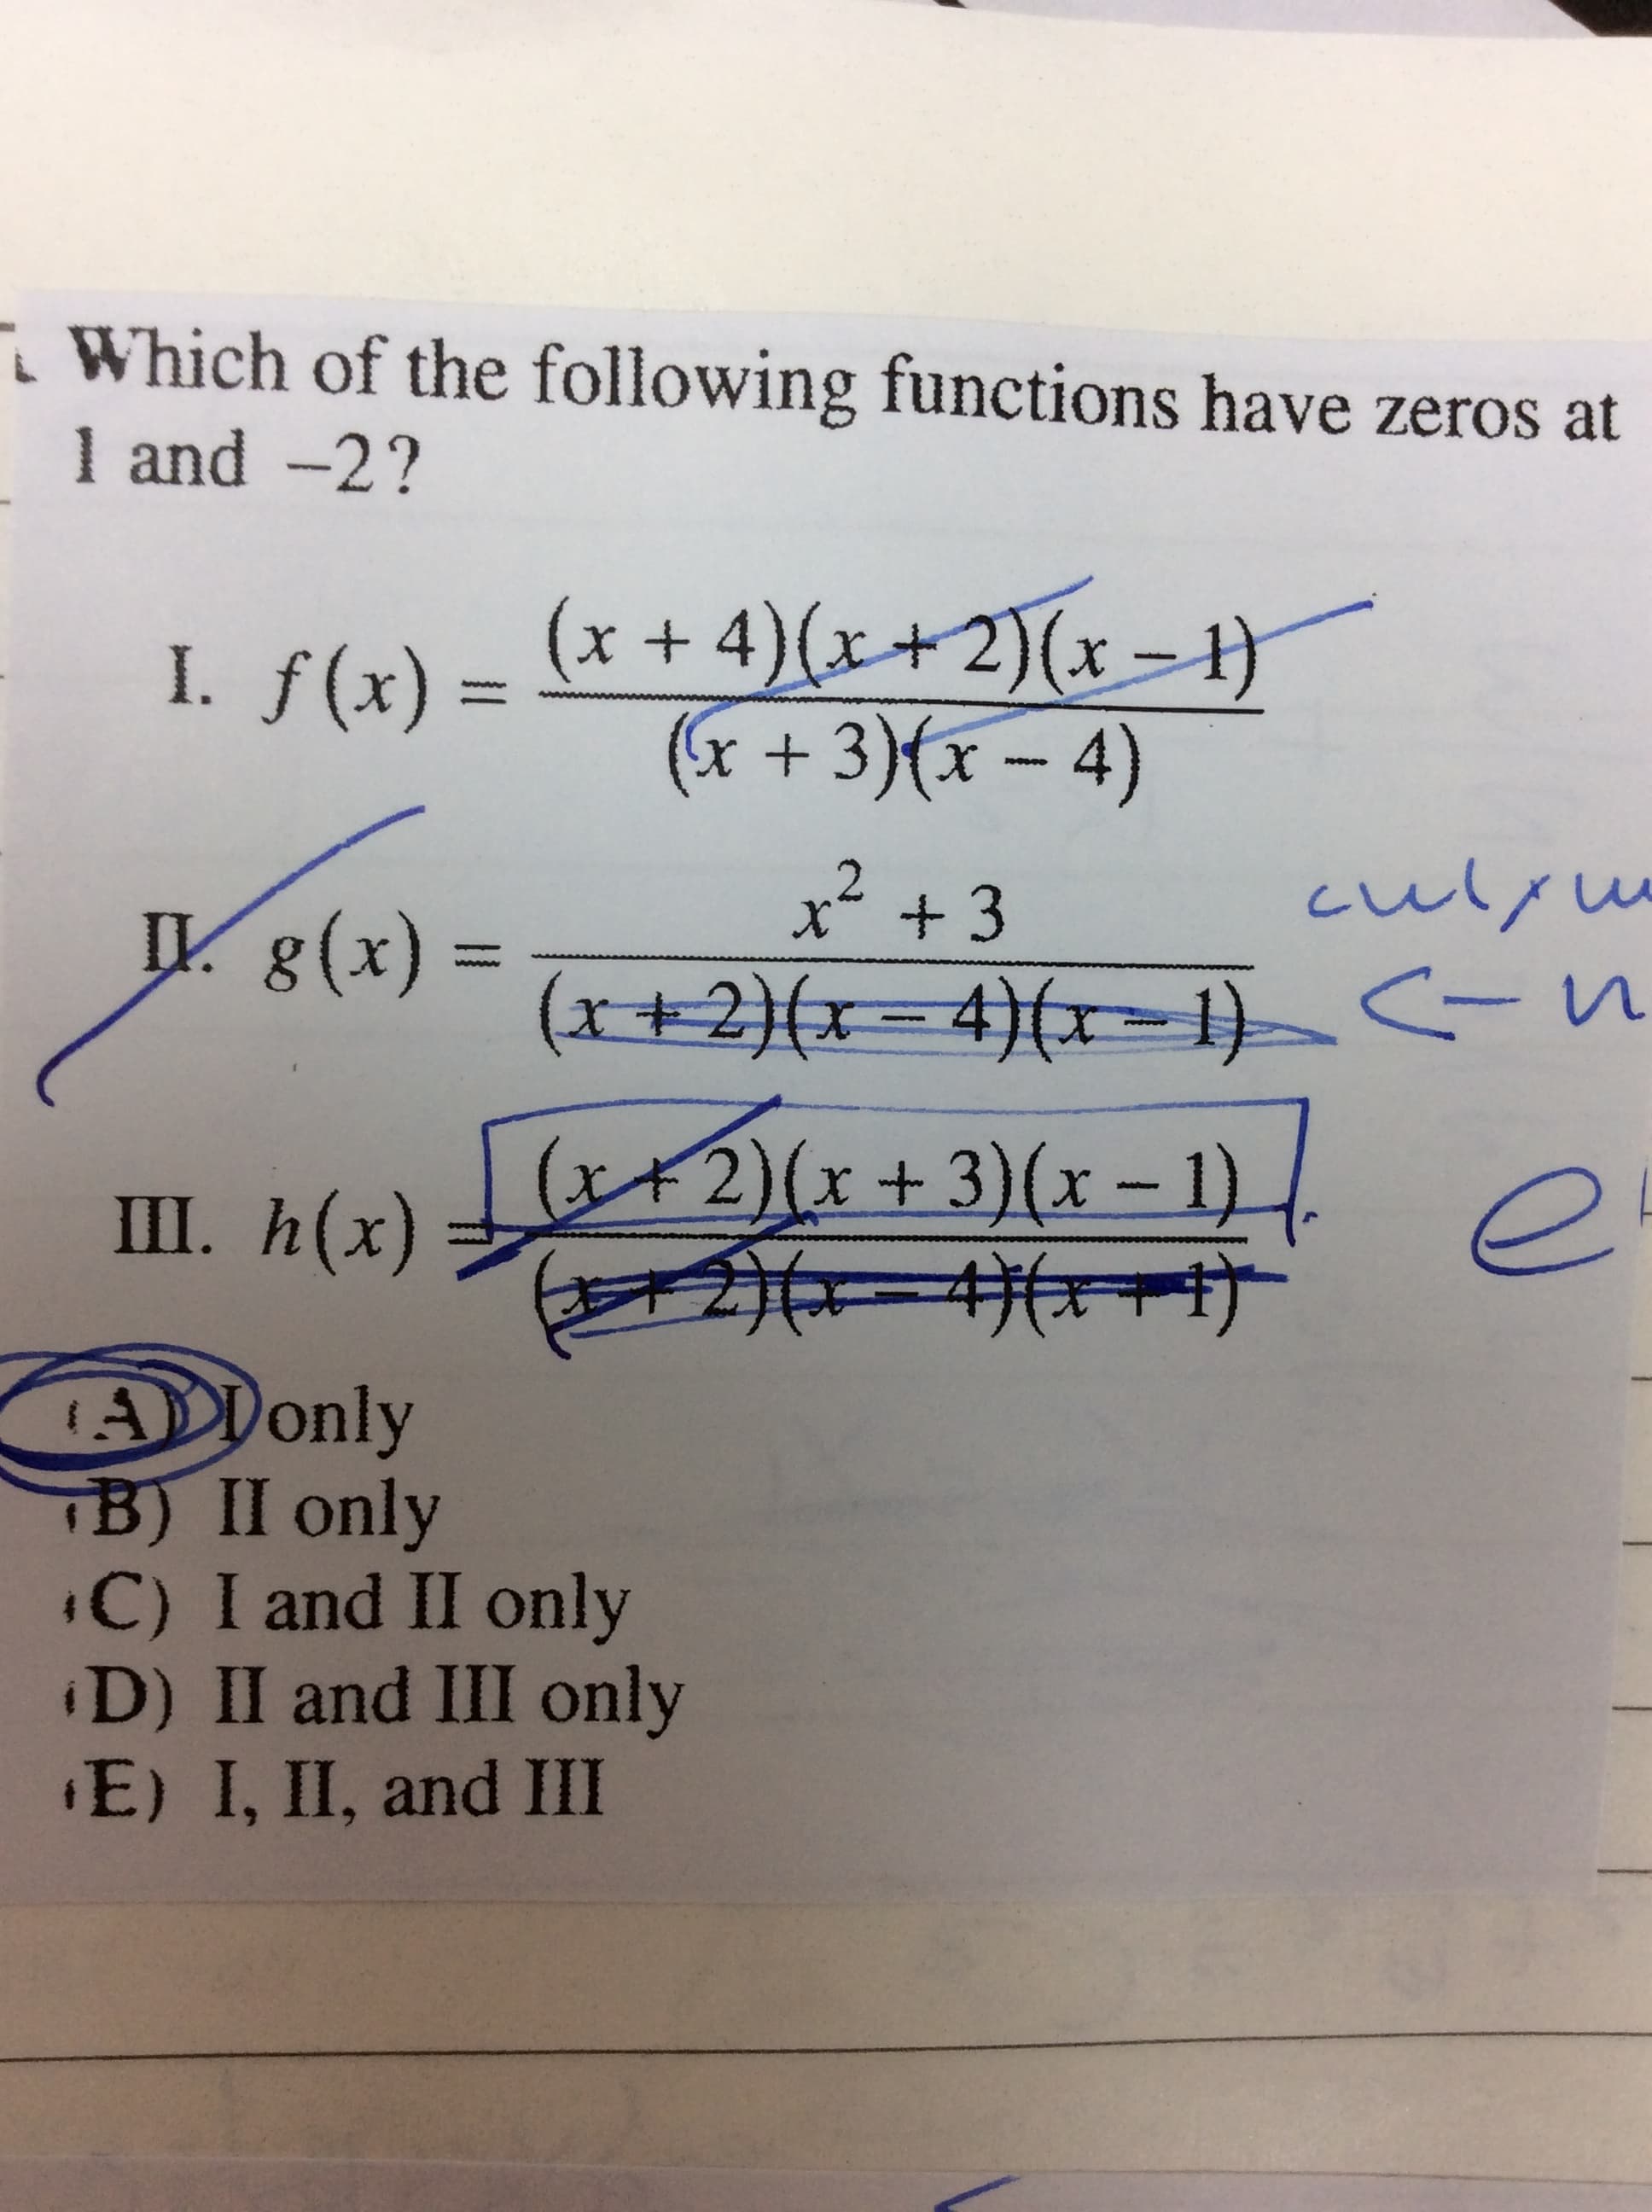 i Which of the following functions have zeros at
1 and -2?
(x + 4)(x+2)(x = }
x + 3){x – 4)
I. f(x) =
II. g(x) =
x* +3
culym
(x+2)(x= 4}(x= 1} -n
III. h(x) 2)(x + 3)(x – 1)
.
न रोत ॉत ी
ADDonly
TB) II only
C) I and II only
D) II and III only
E) I, II, and III
